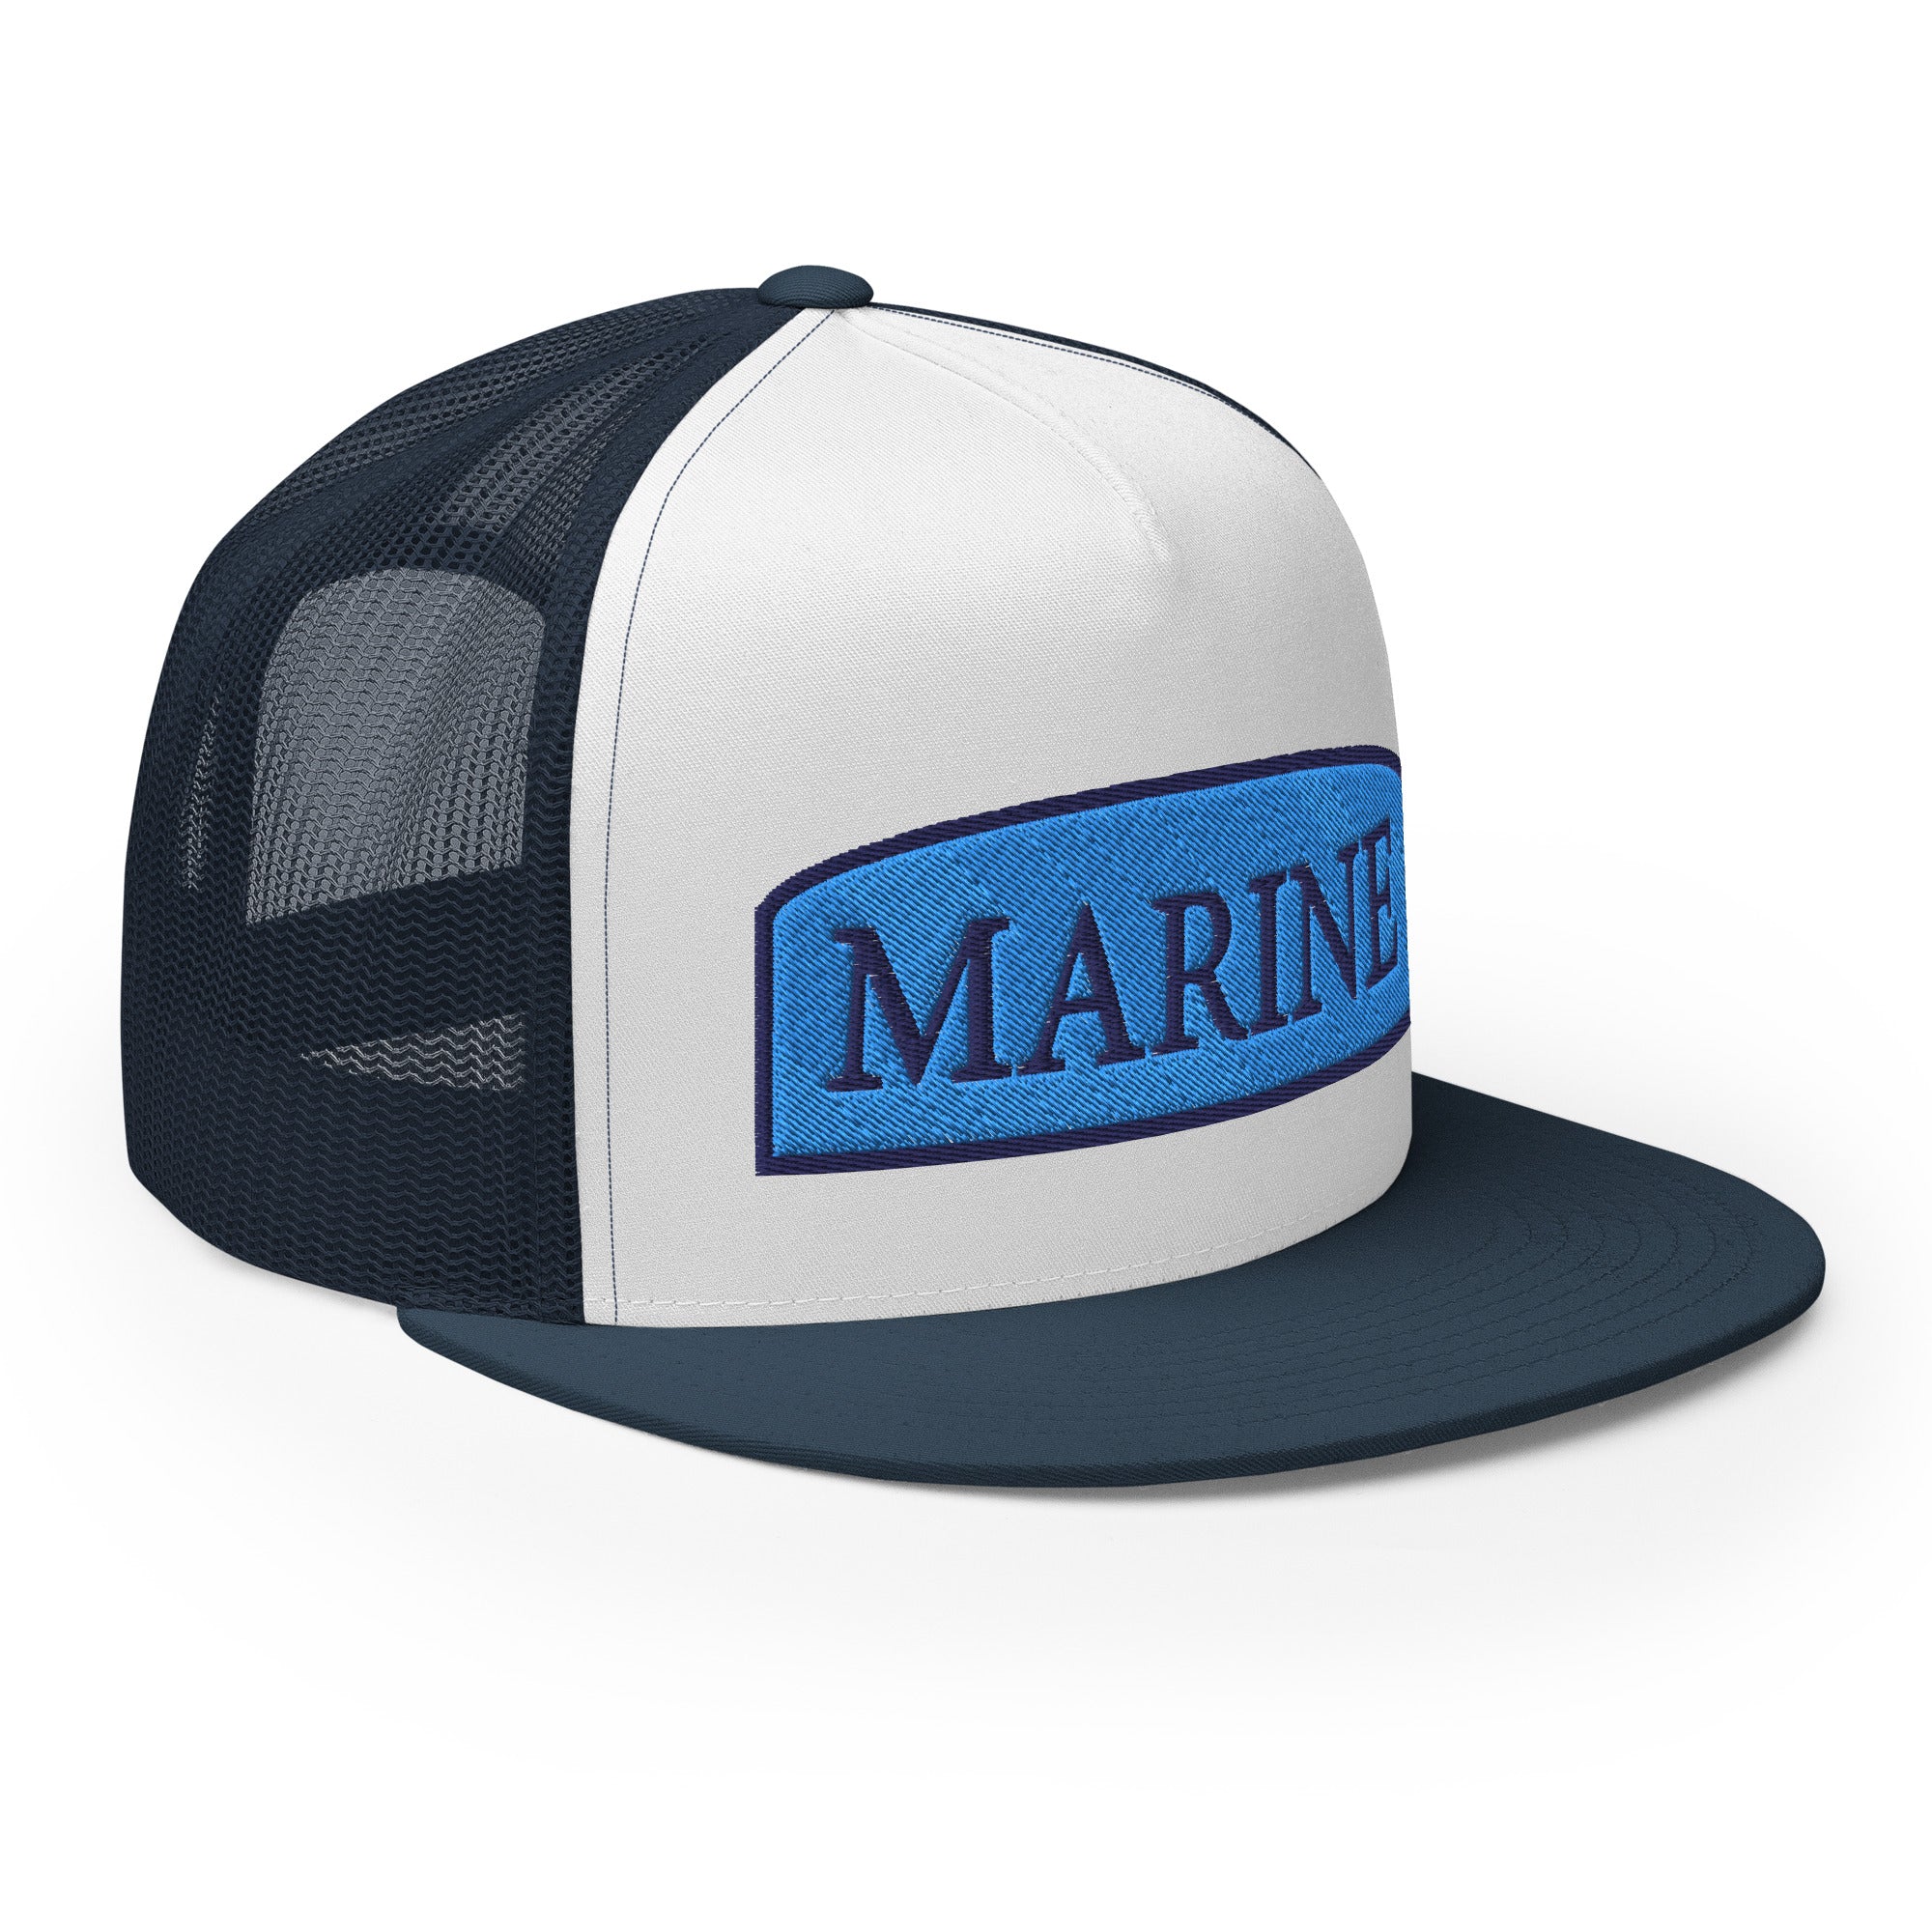 One Piece Marine Cap Hat Embroidered - Koby